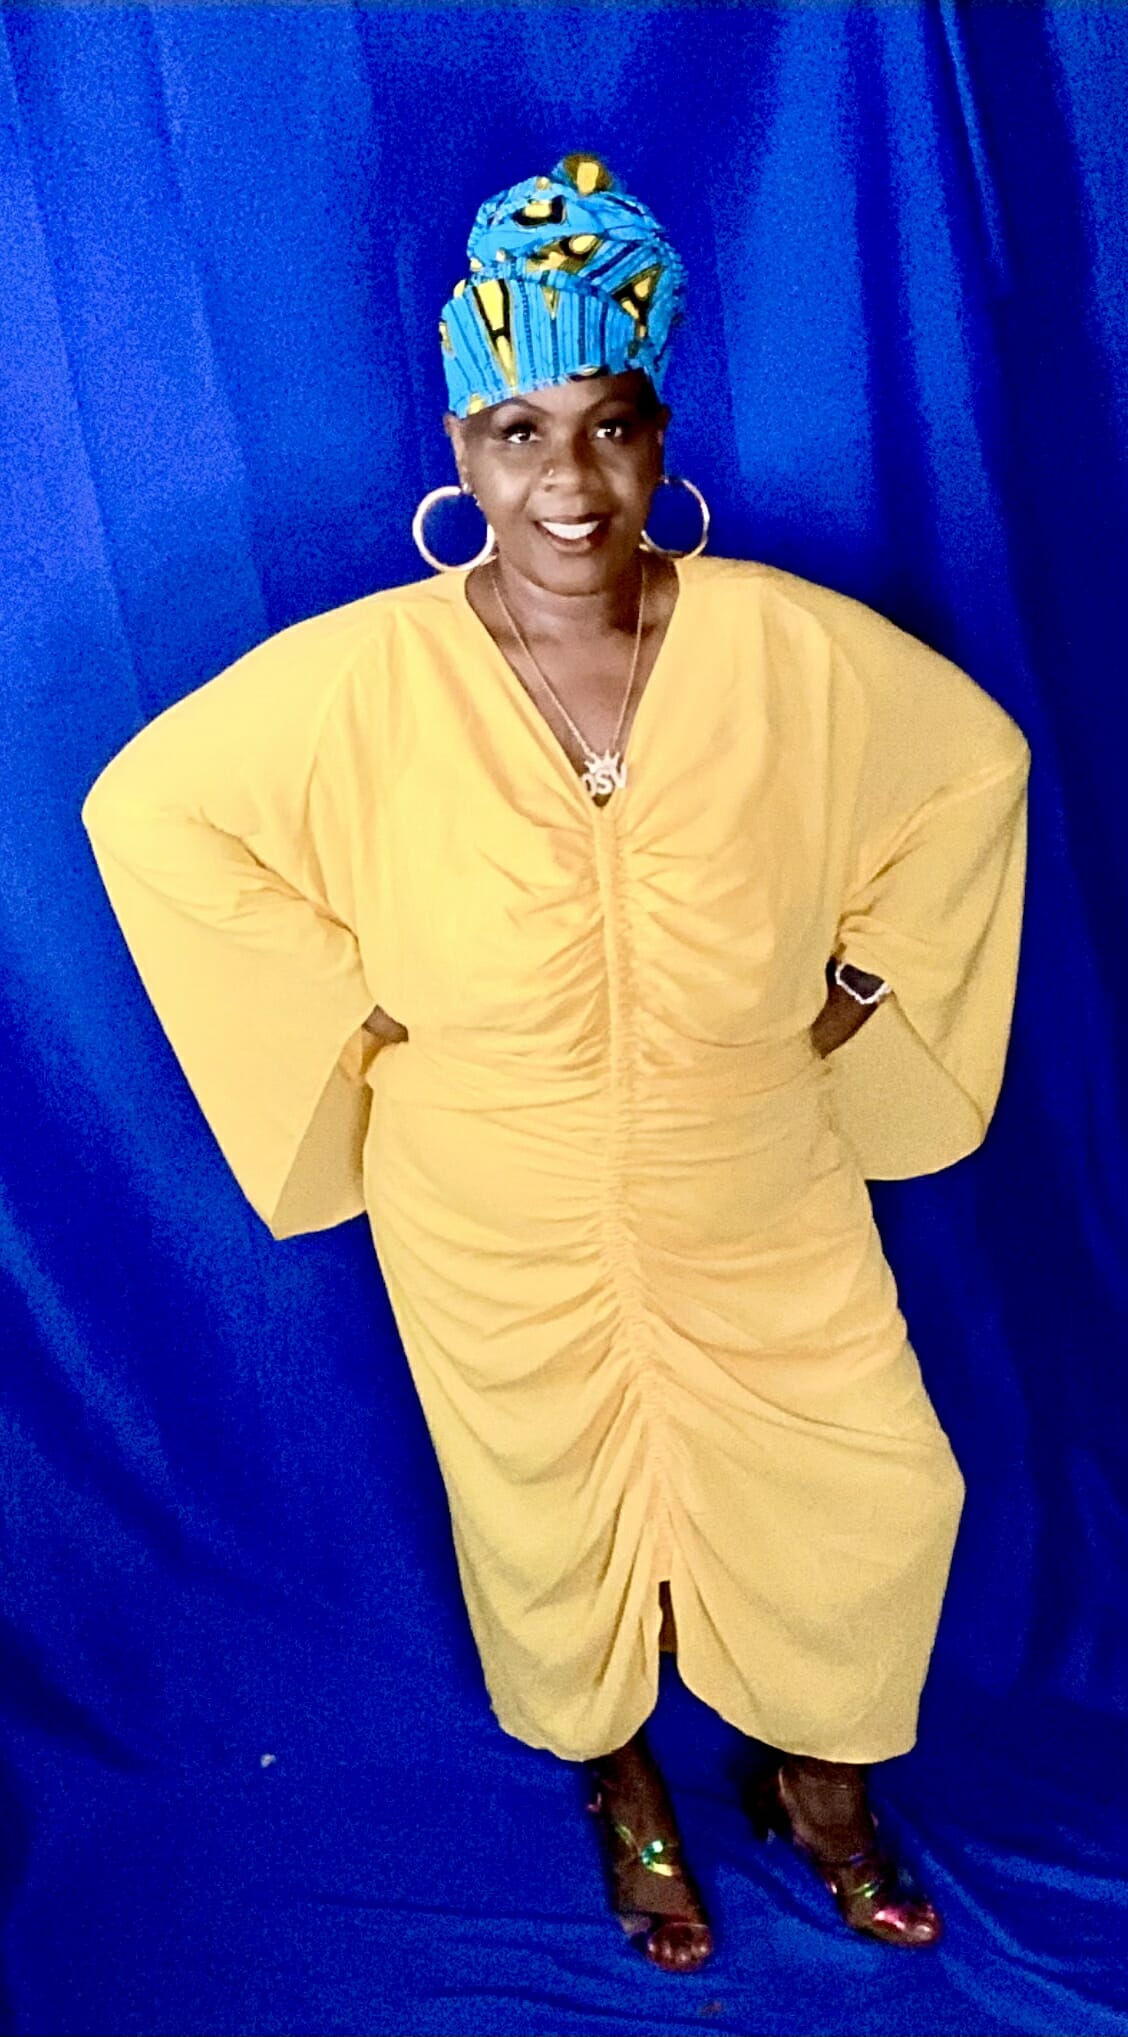 Black woman wearing yellow dress and blue headwrap.